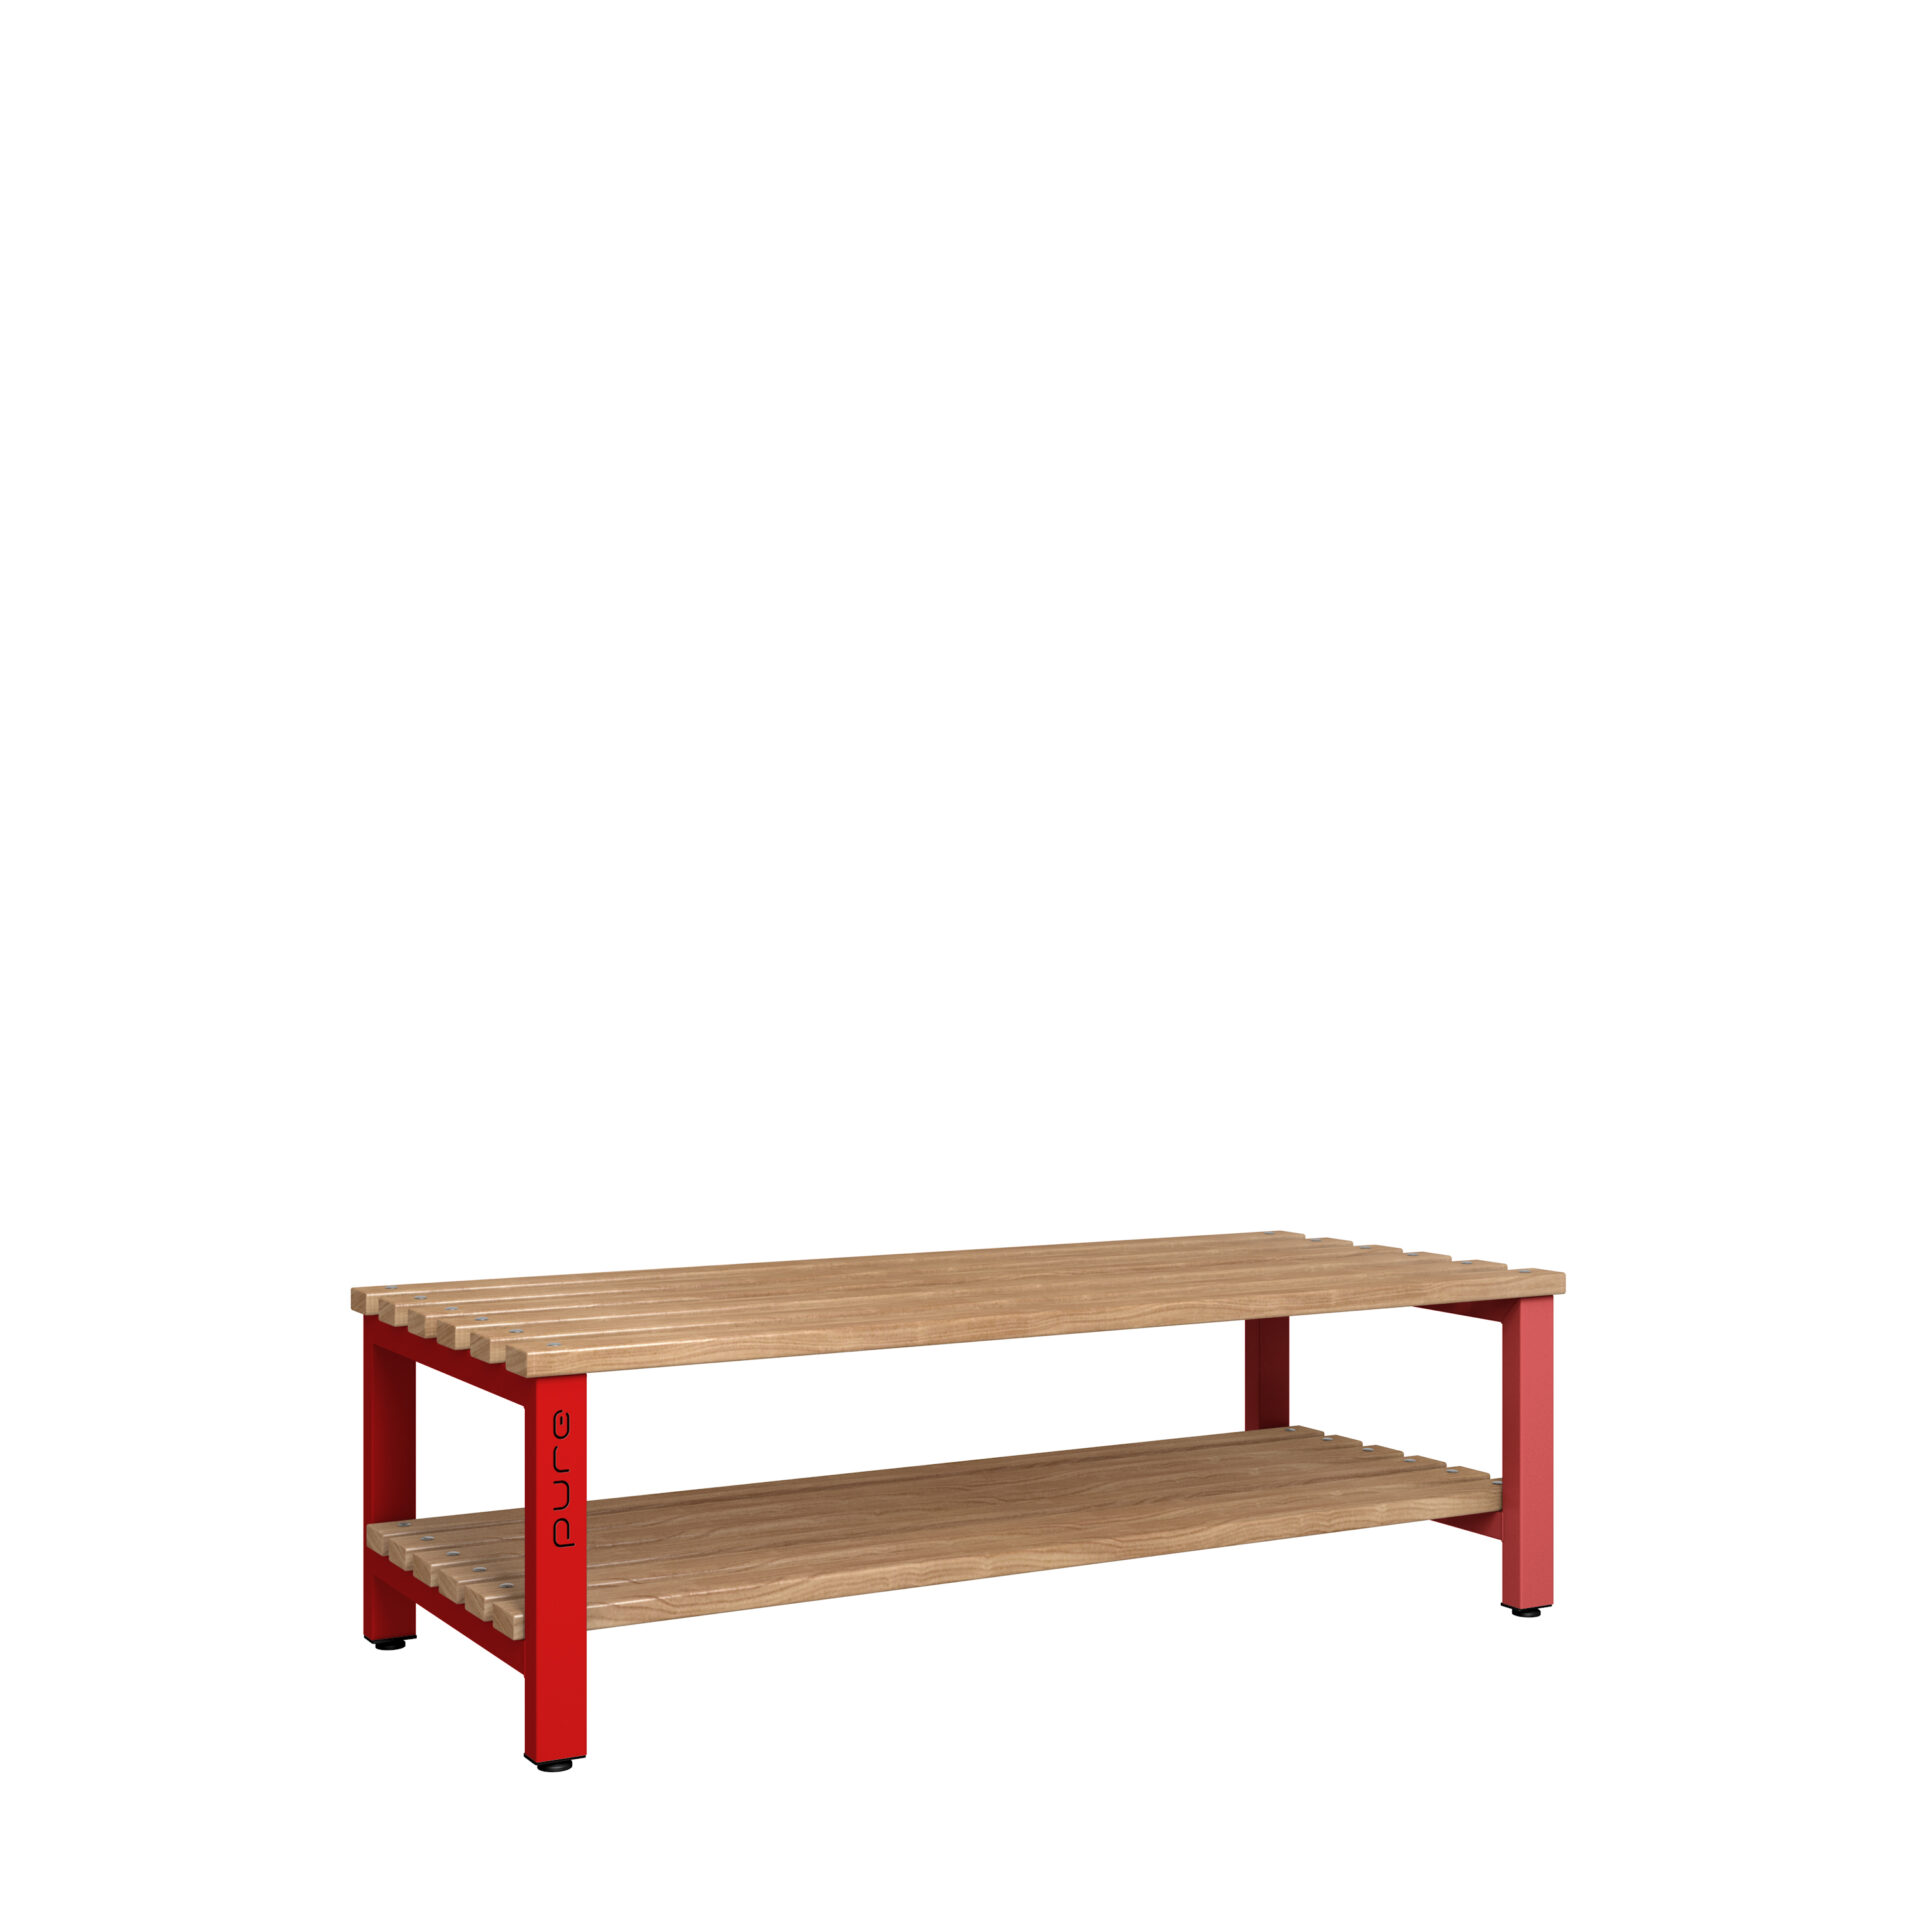 Pure Carbon Zero Double Sided 1500mm Standard Bench With Shoe Shelf - Flame Red / Solid Timber